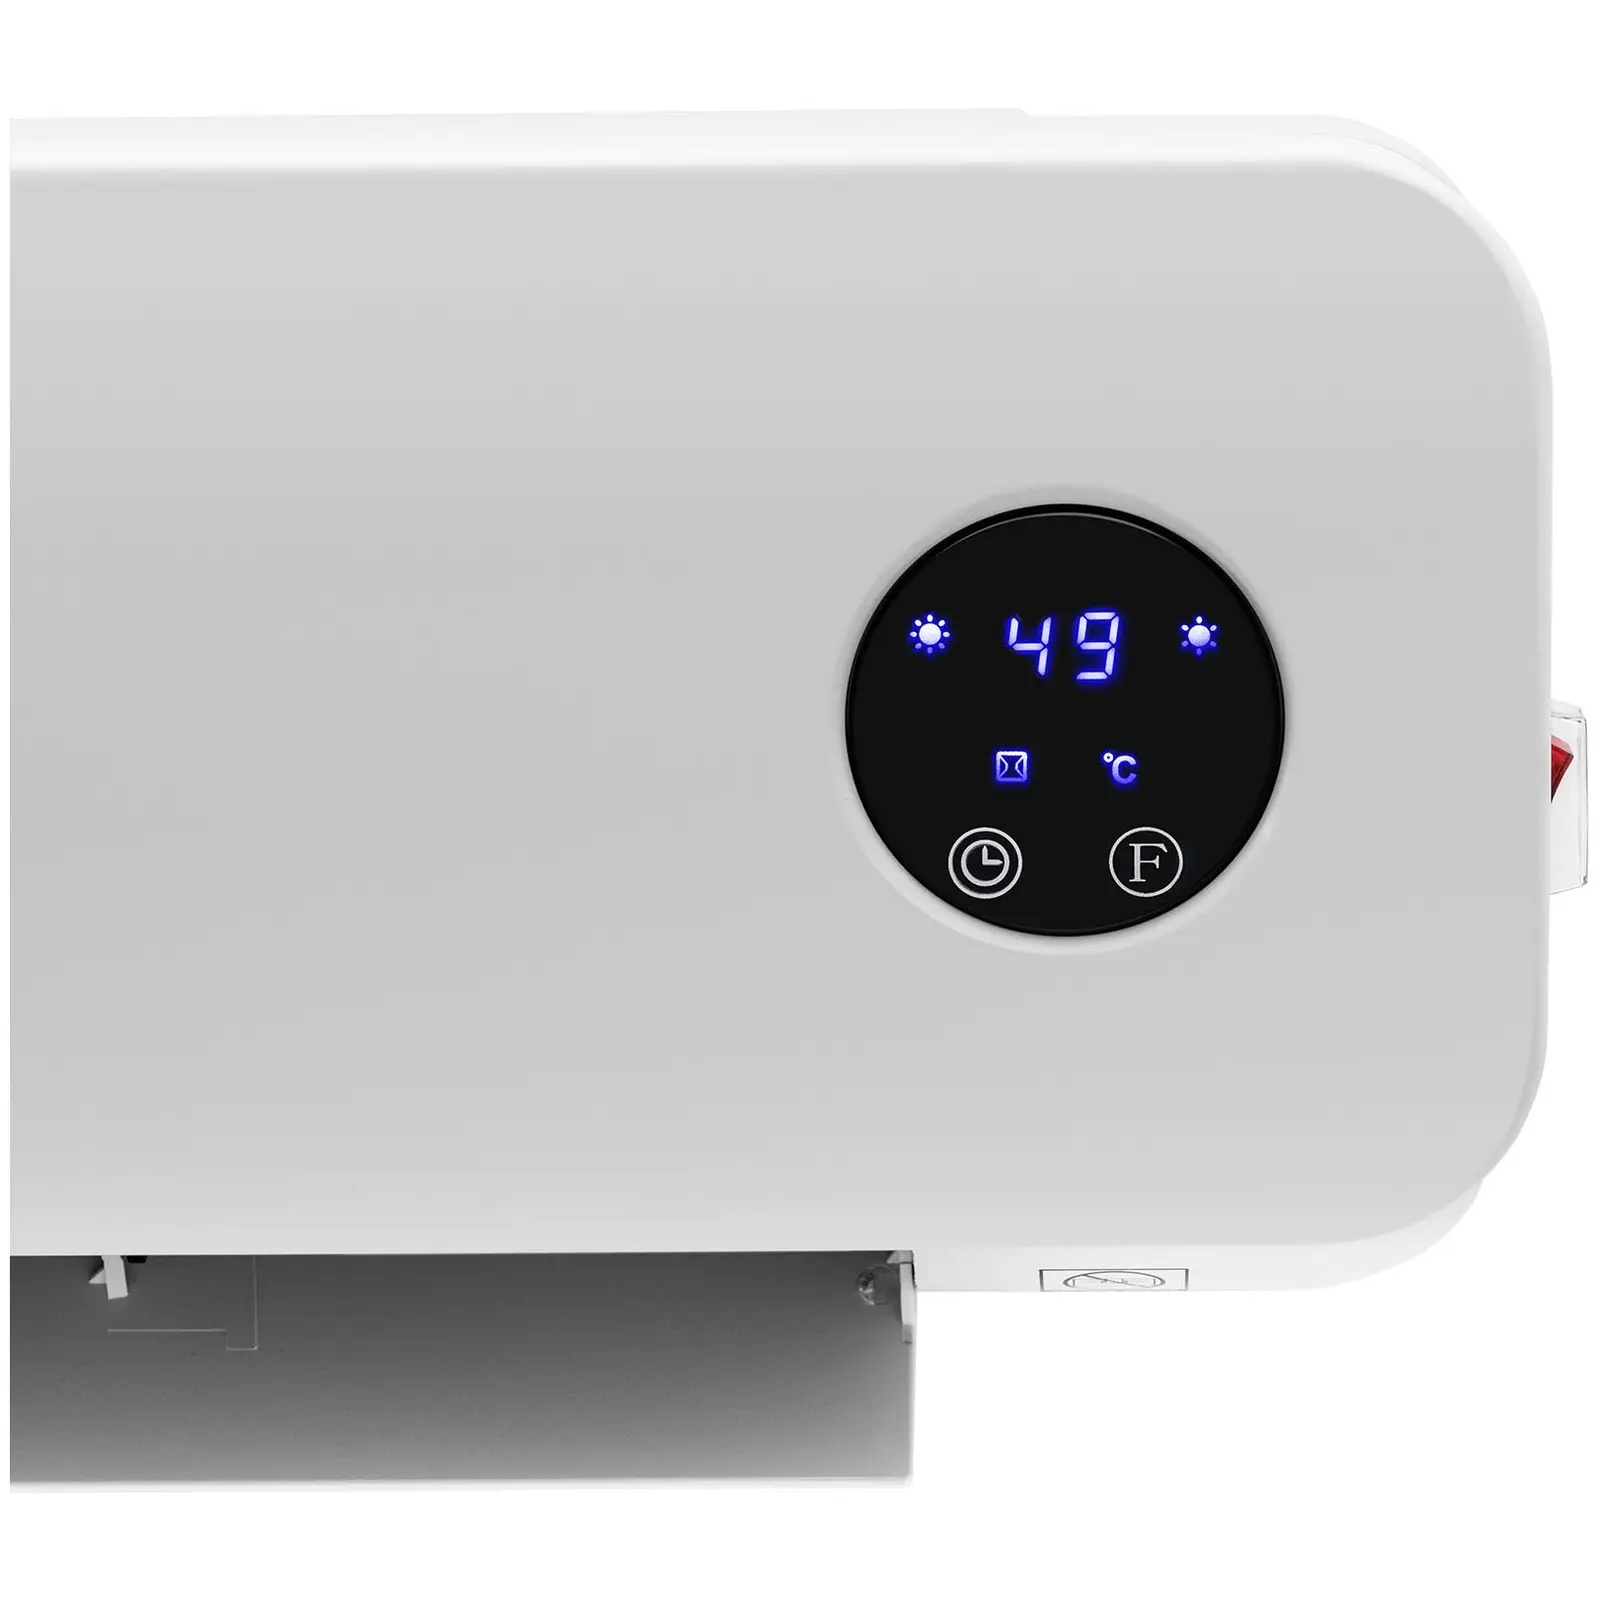 Wall-mounted Electric Wall Heater - ceramic - 10 - 49 °C - 1000/2000 W - remote control - extra narrow